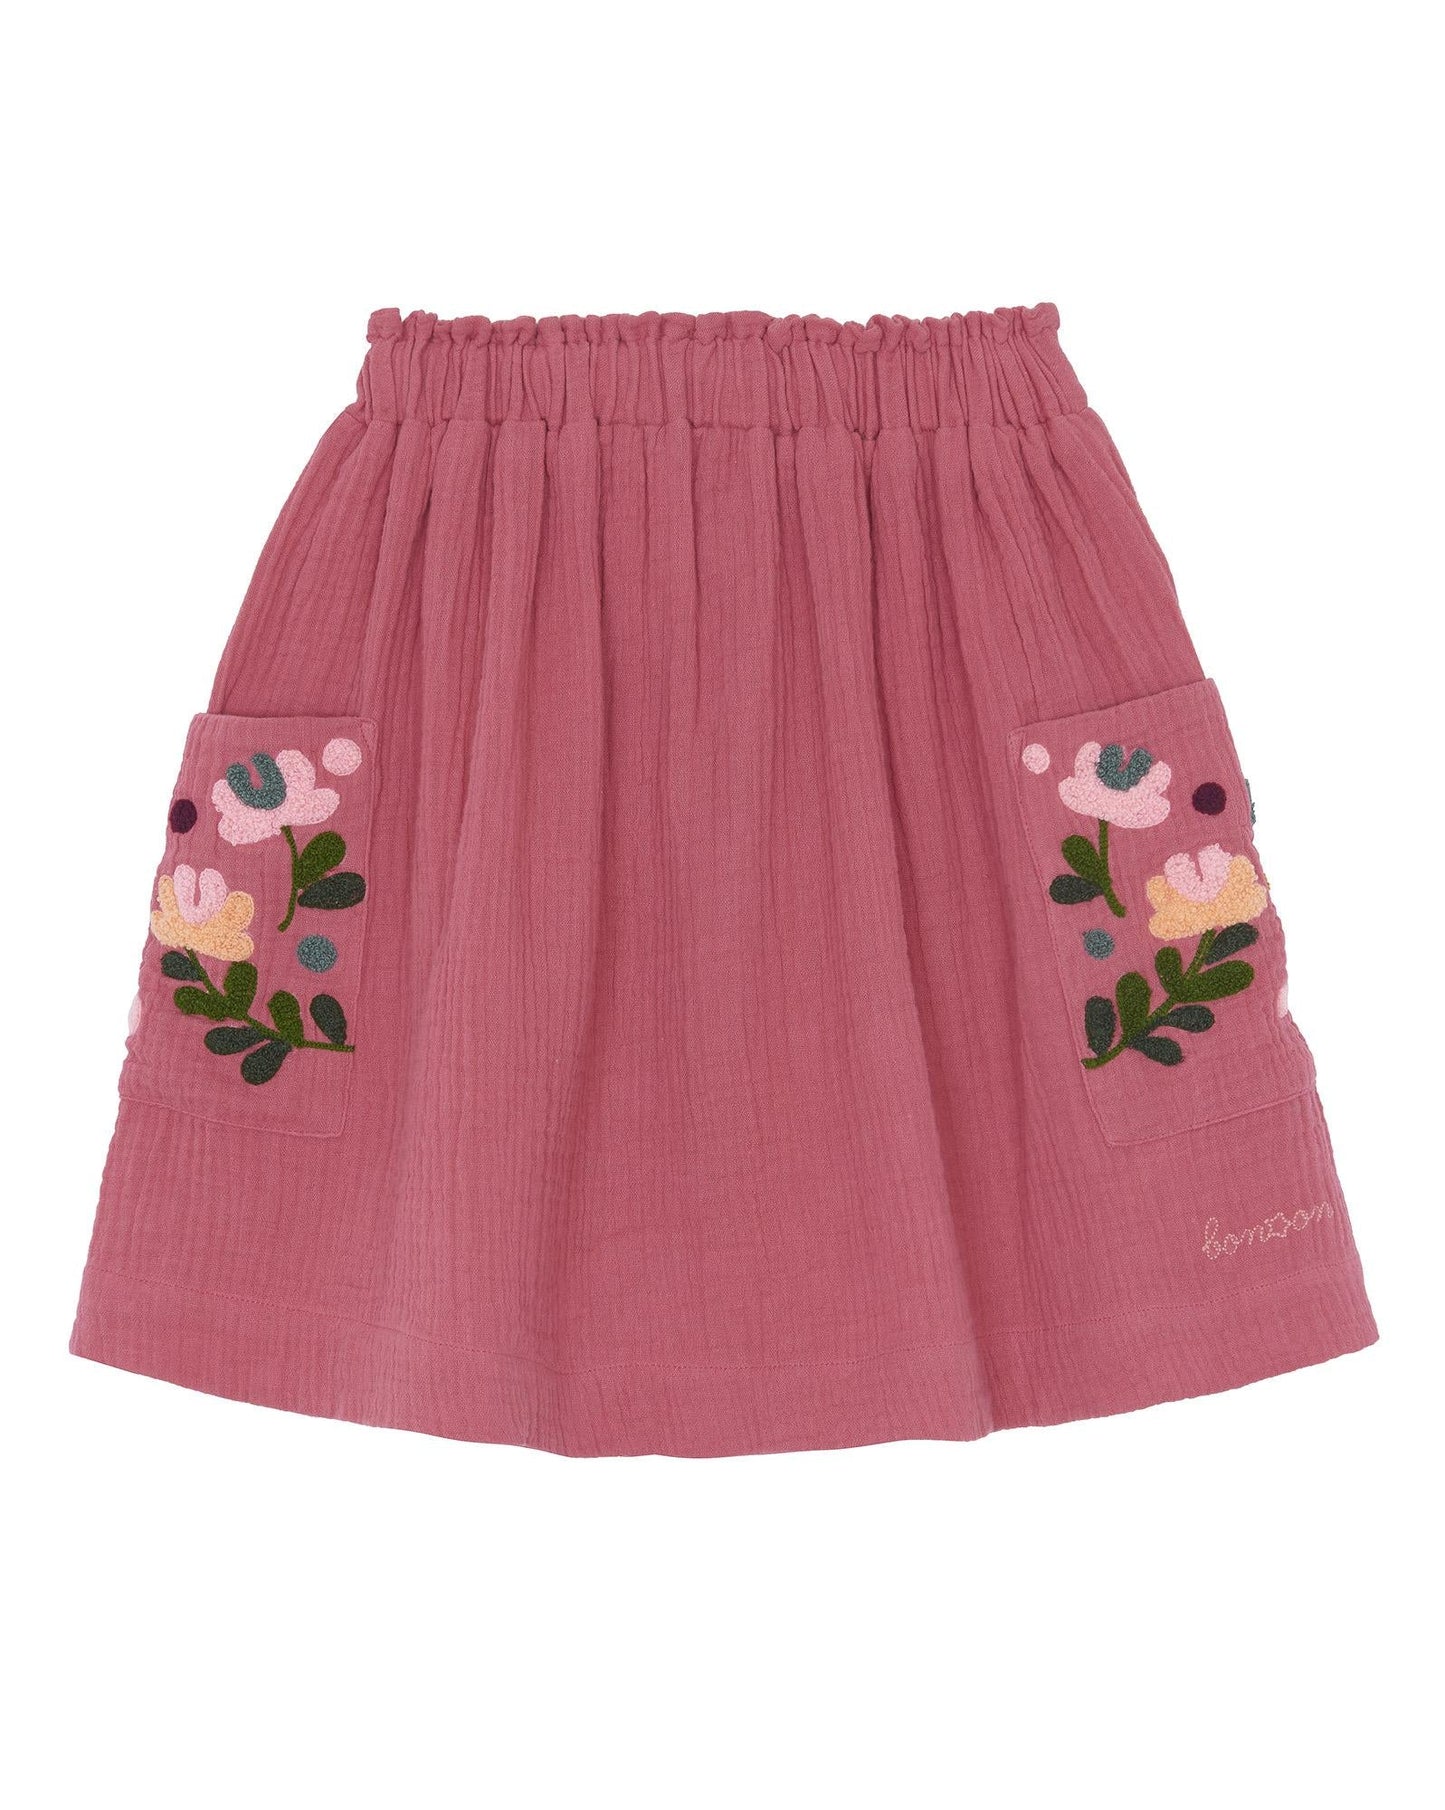 Skirt - hive Pink in double cotton gauze